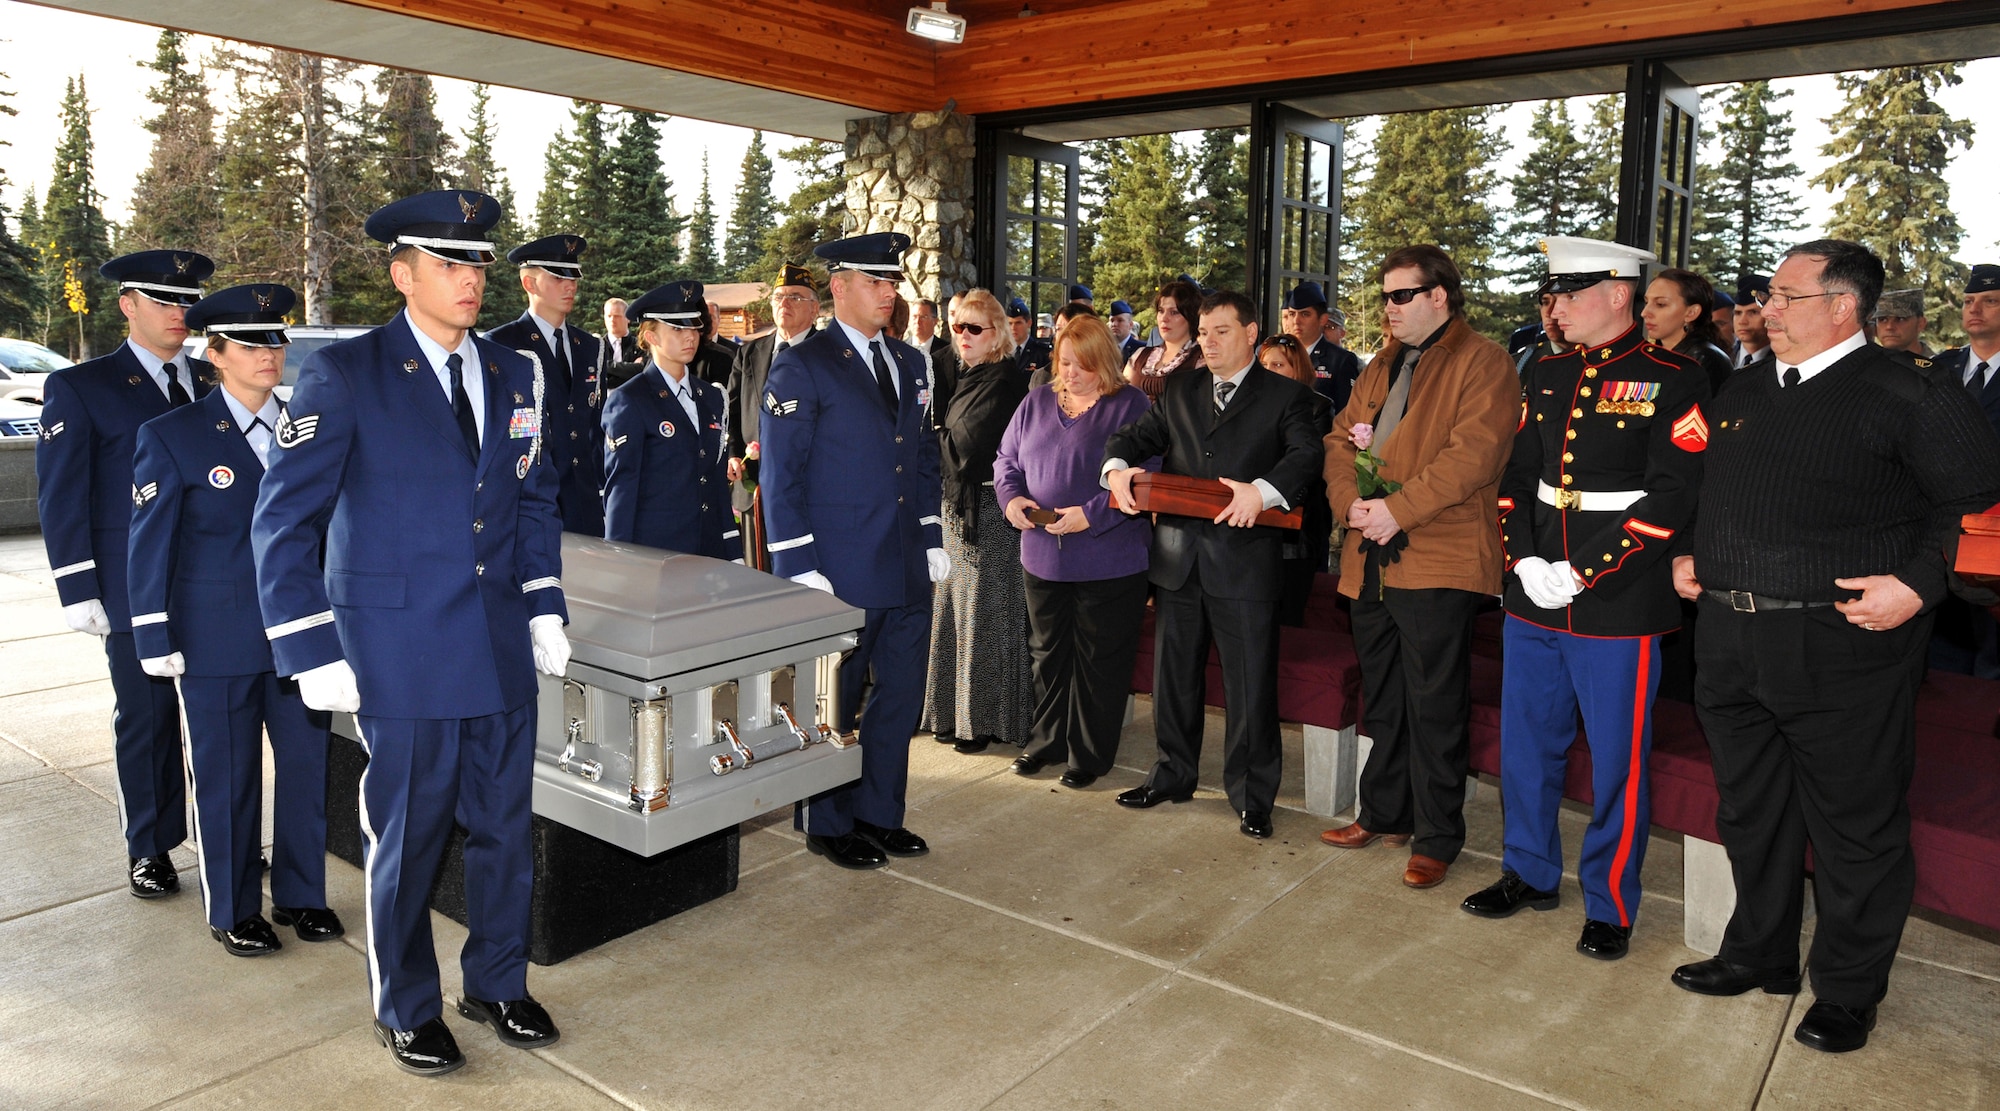 FORT RICHARDSON, Alaska -- Members of the Elmendorf Air Force Base Honor Guard prepare to transfer the coffin of Staff Sgt. Shawn Rankin during the funeral service here at the Fort Richardson National Cemetery Oct. 15. Rankin of Anchorage, Alaska, was assigned to the 56th Aircraft Maintenance Squadron and served as an F-16 Fighting Falcon crew chief at Luke Air Force Base, Ariz. (U.S. Air Force photo/Senior Airman Laura Turner)